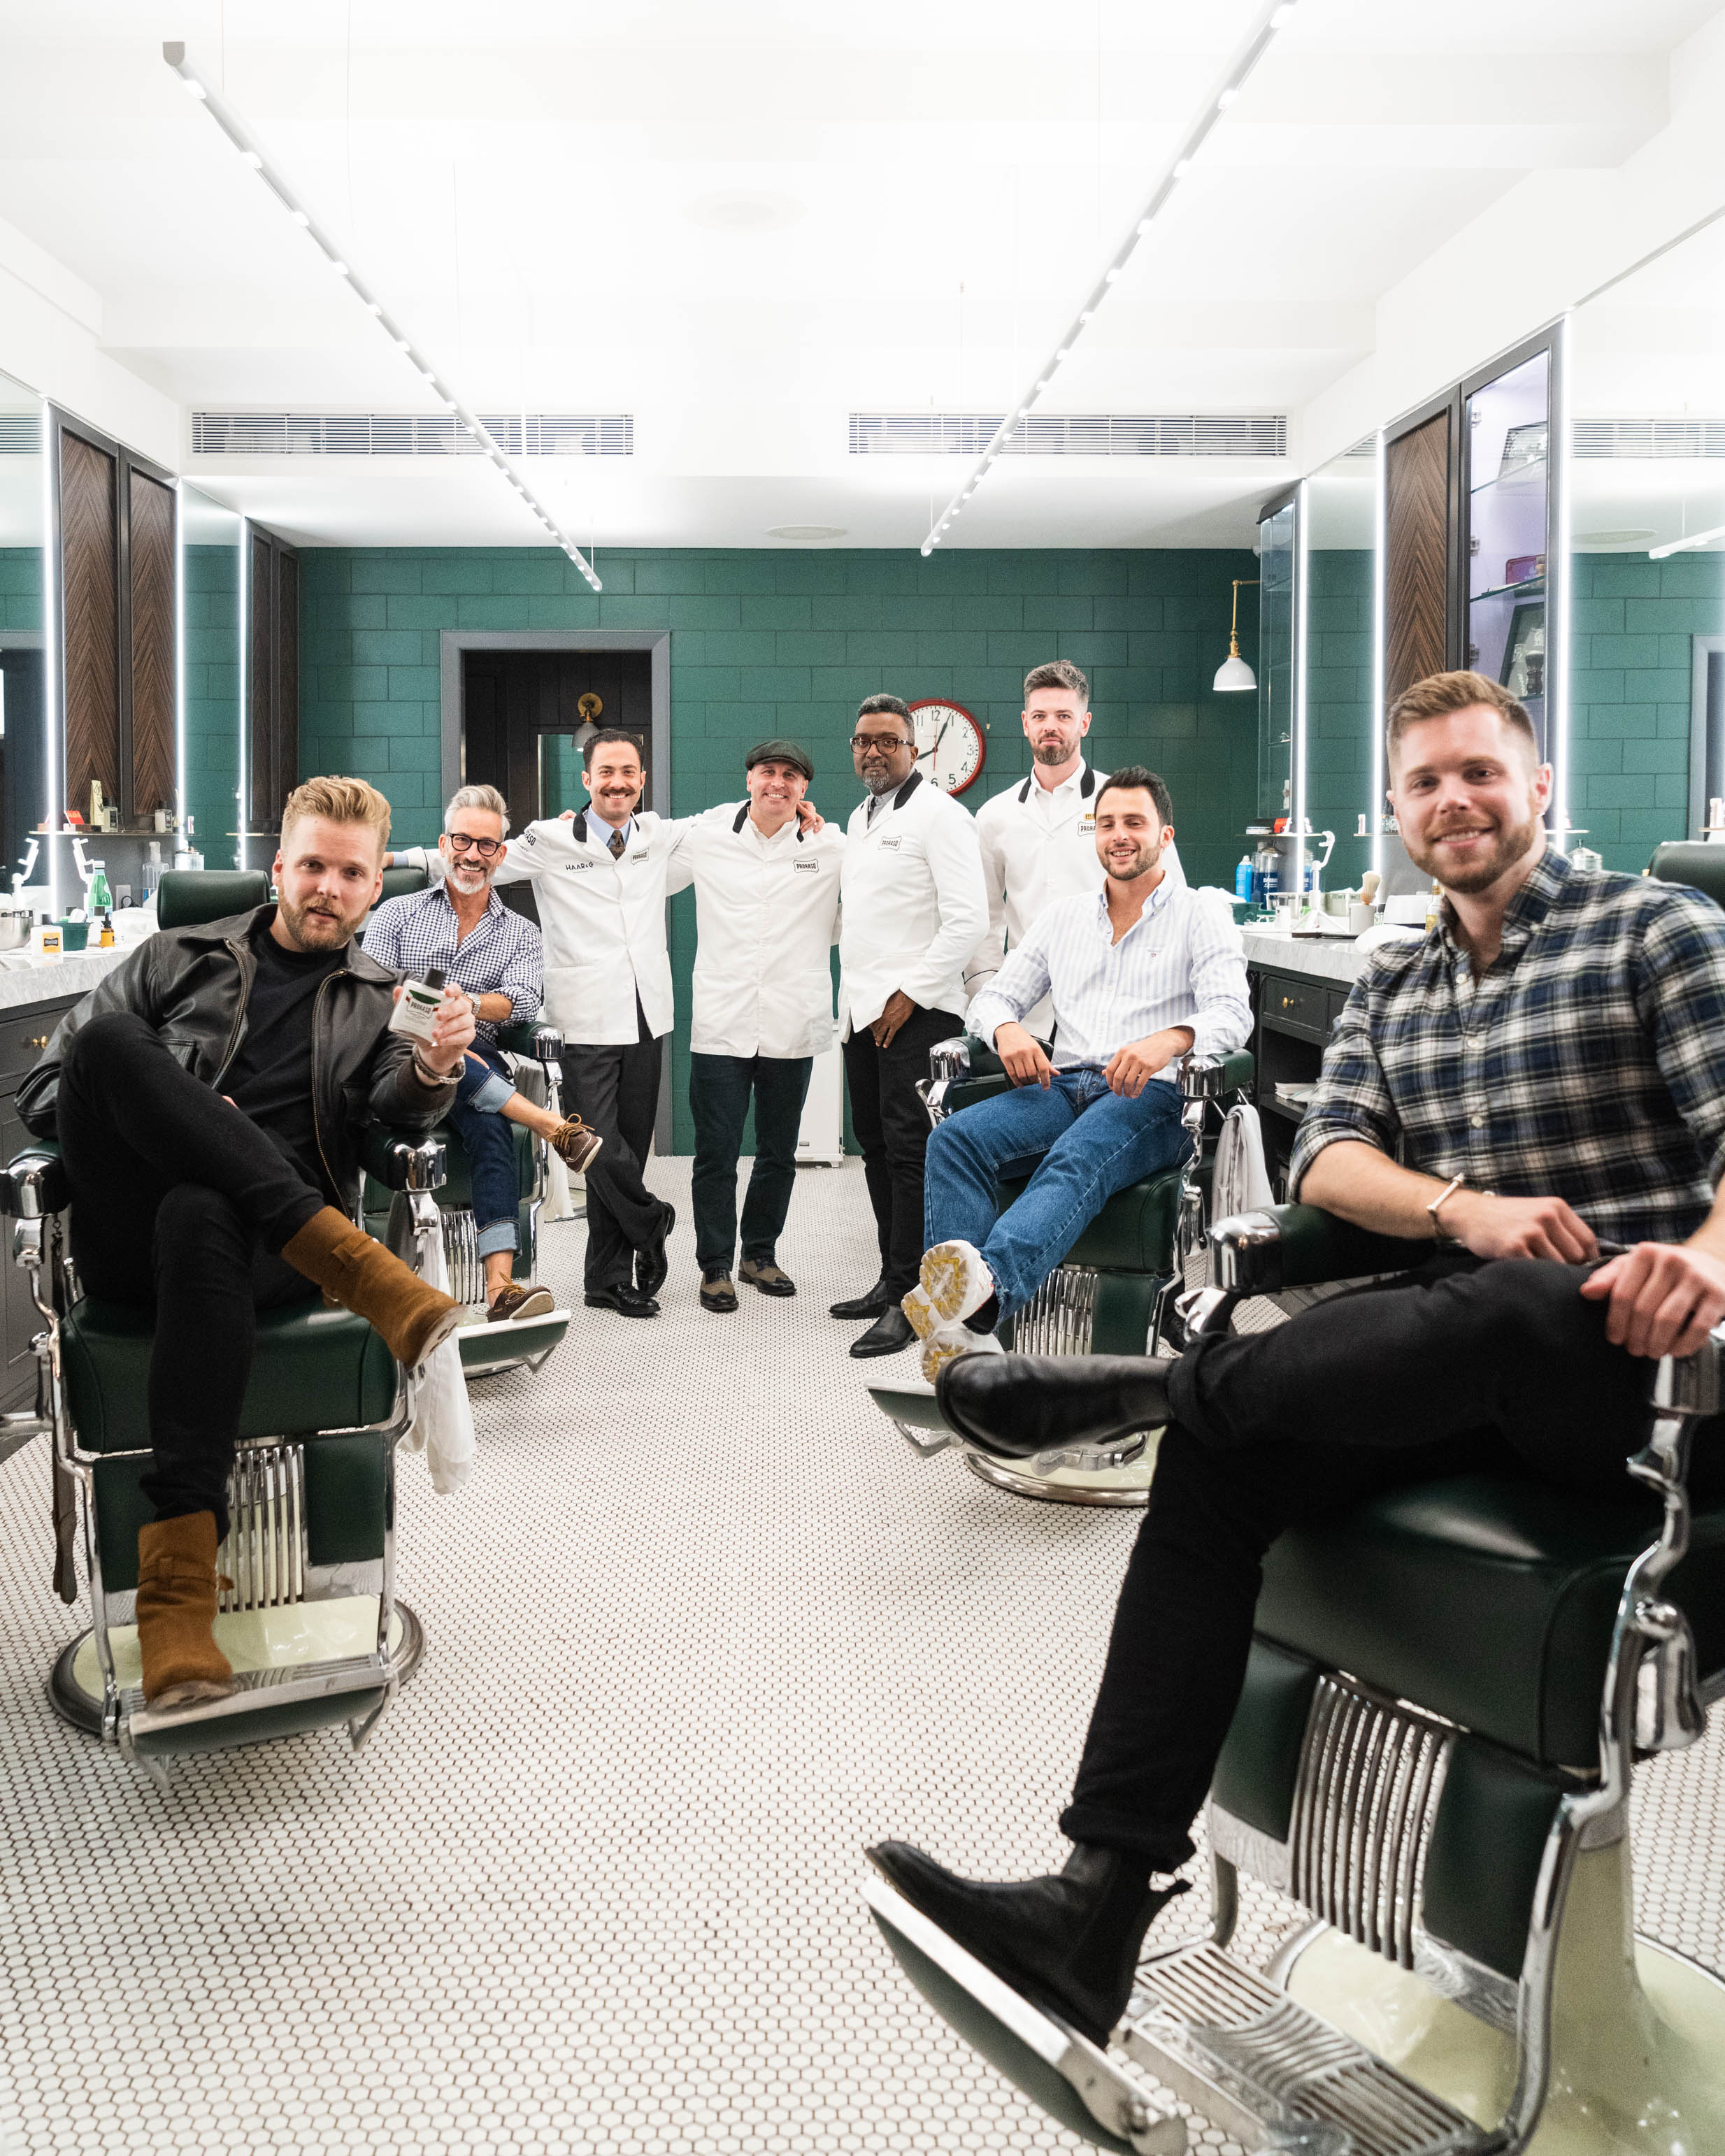 Image of 8 men getting ready for their Proraso class sitting in barber chairs at Haar & Co. Barbershop in New York City